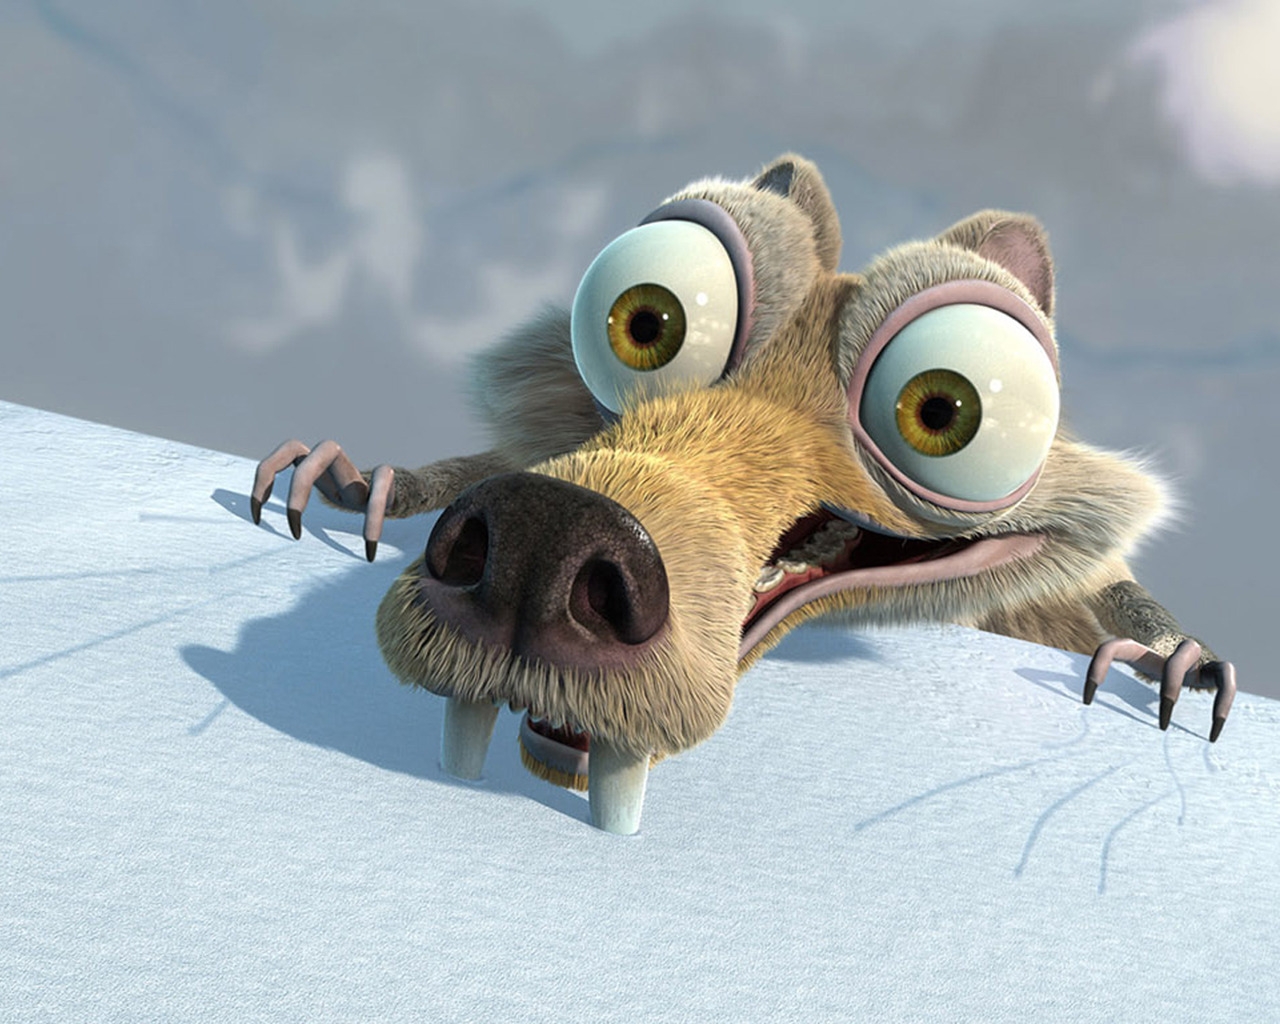 Ice Age Scrat for 1280 x 1024 resolution